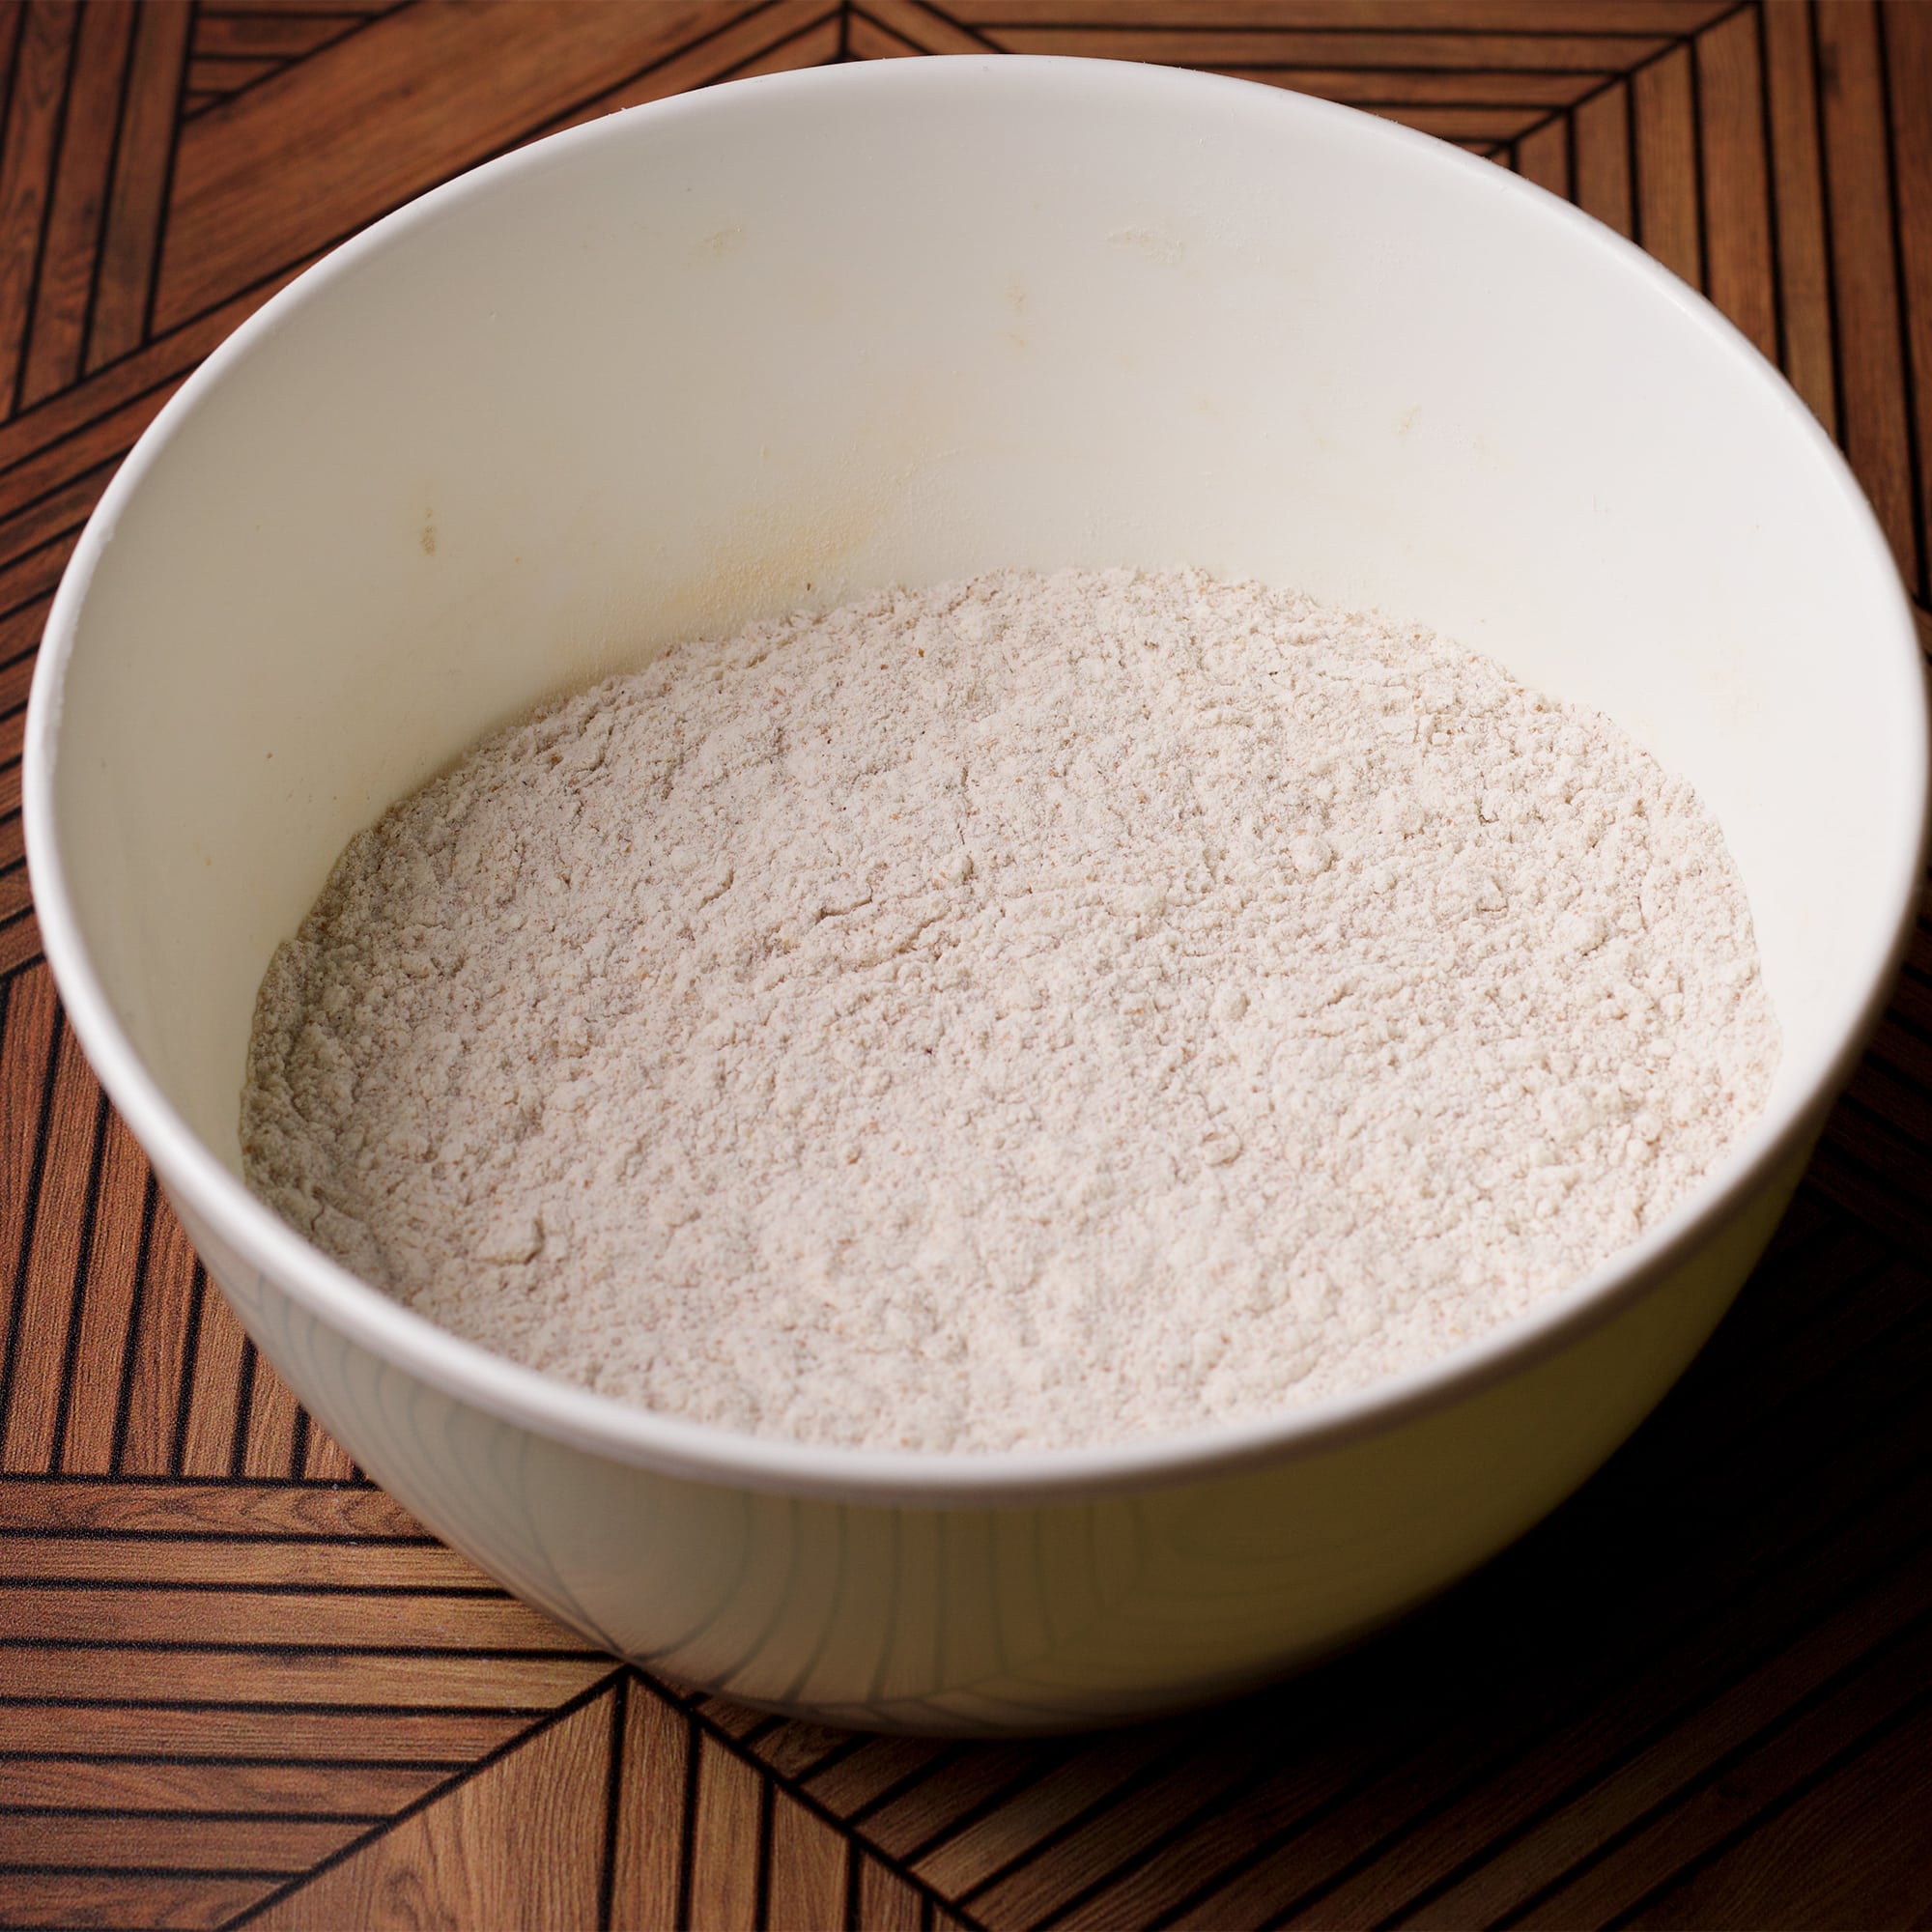 All the dry ingredients for honey cake blended together in a white bowl.